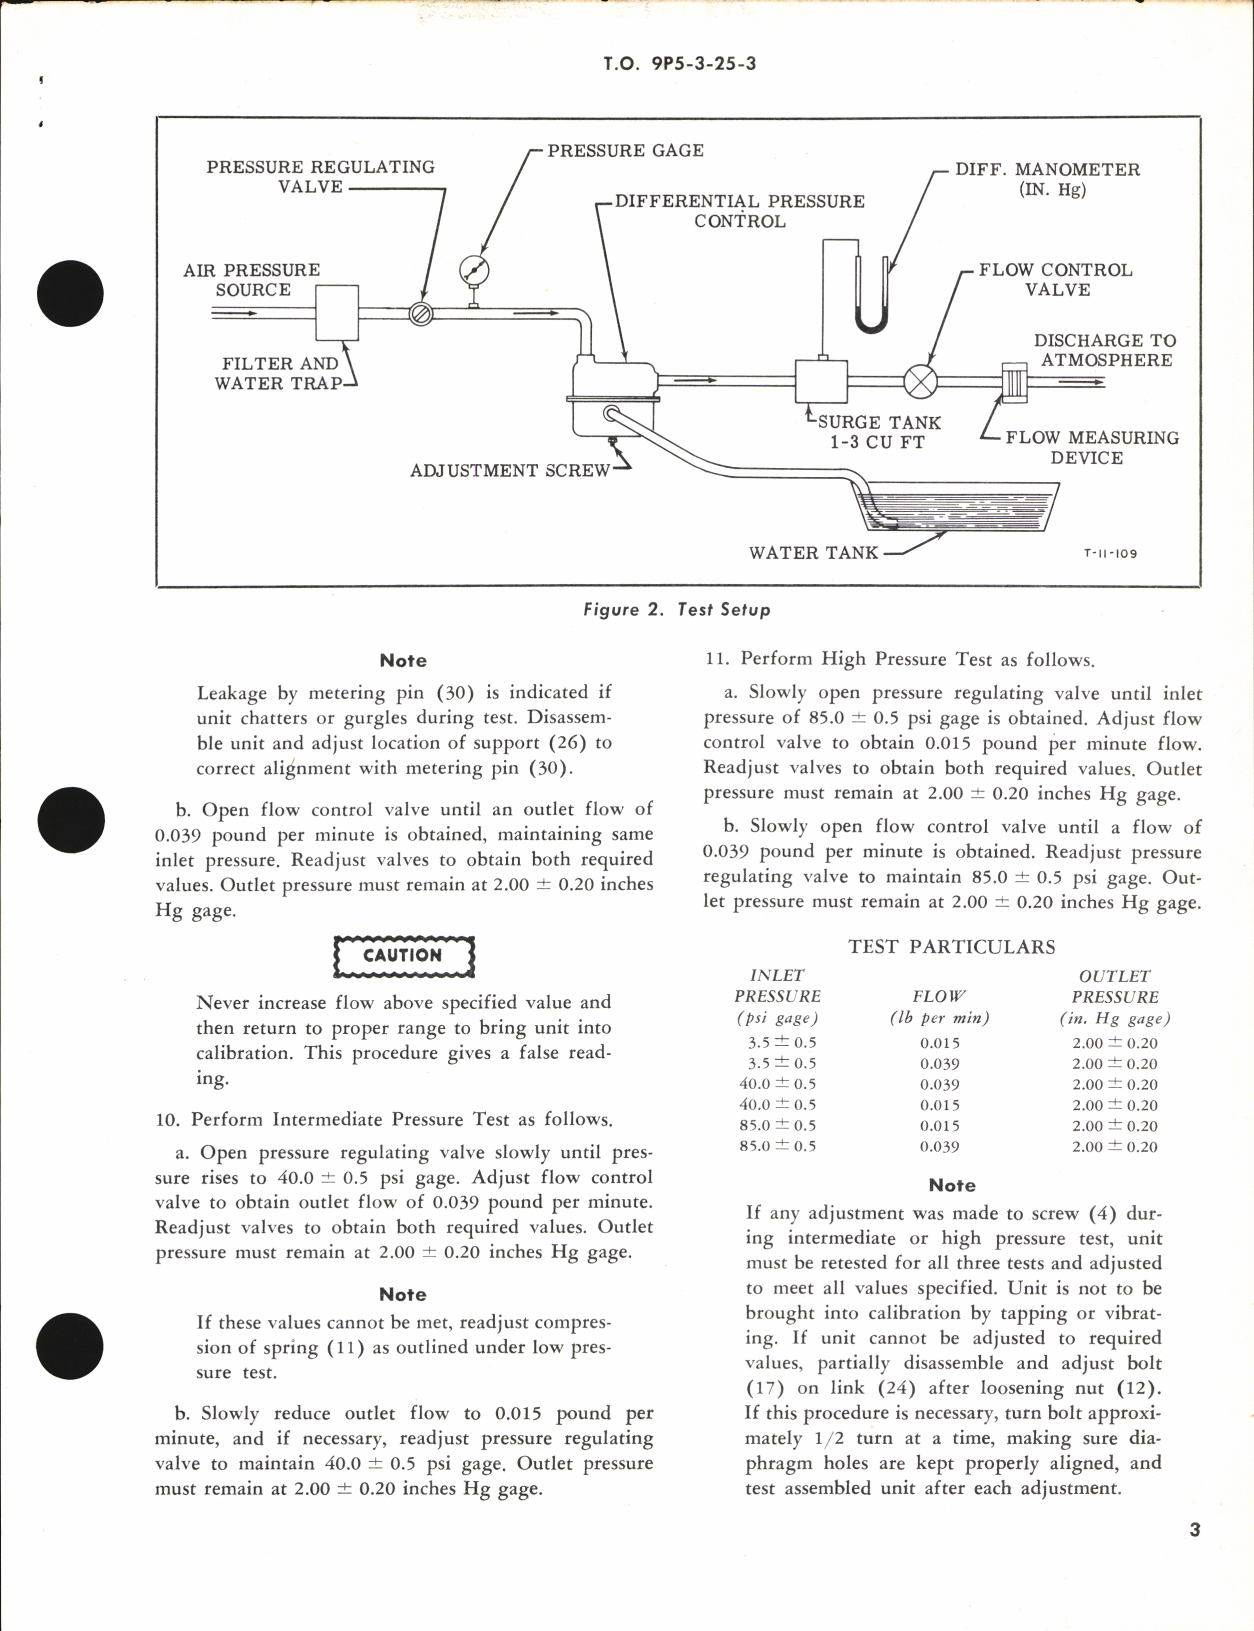 Sample page 3  from AirCorps Library document: Overhaul Instructions with Parts Breakdown for Differential Pressure Control Part no. 92482-0200